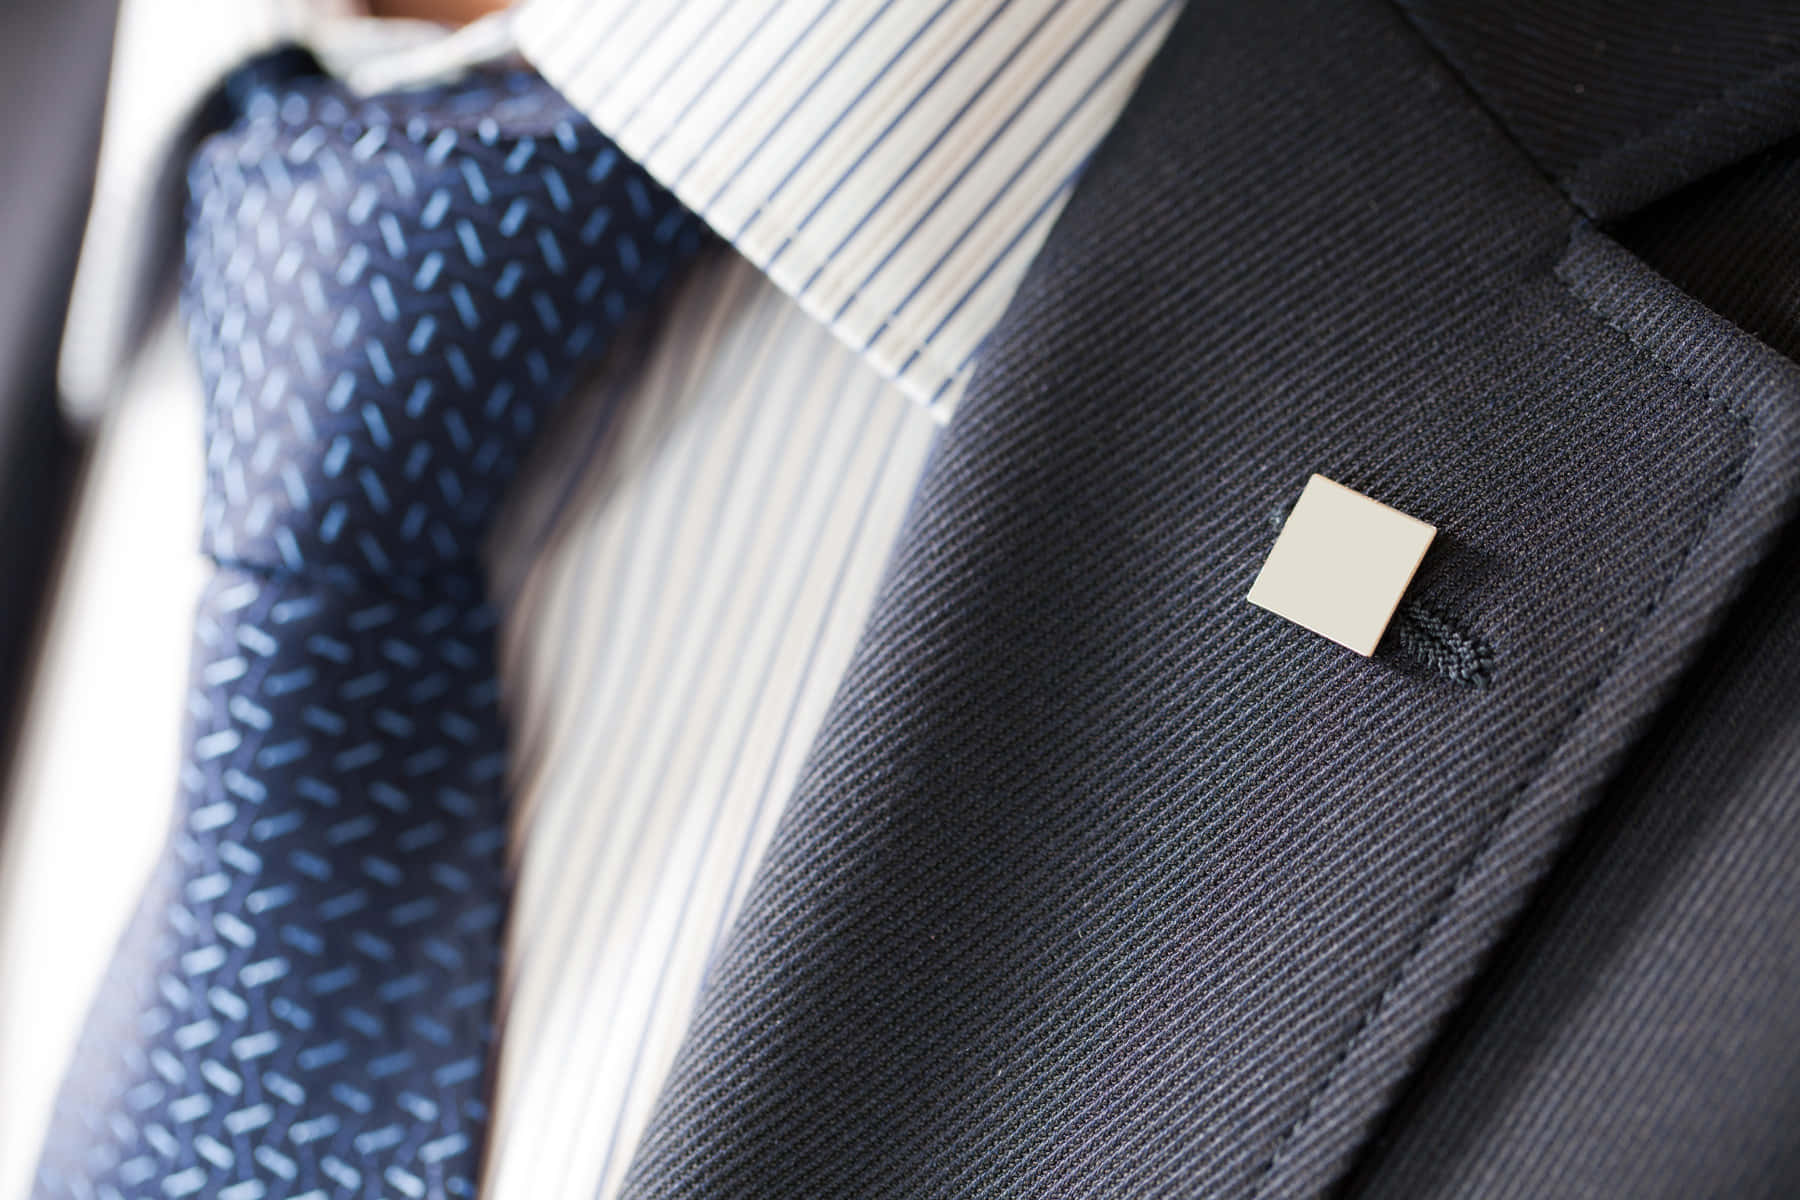 Man In Suit With Square Pin Wallpaper